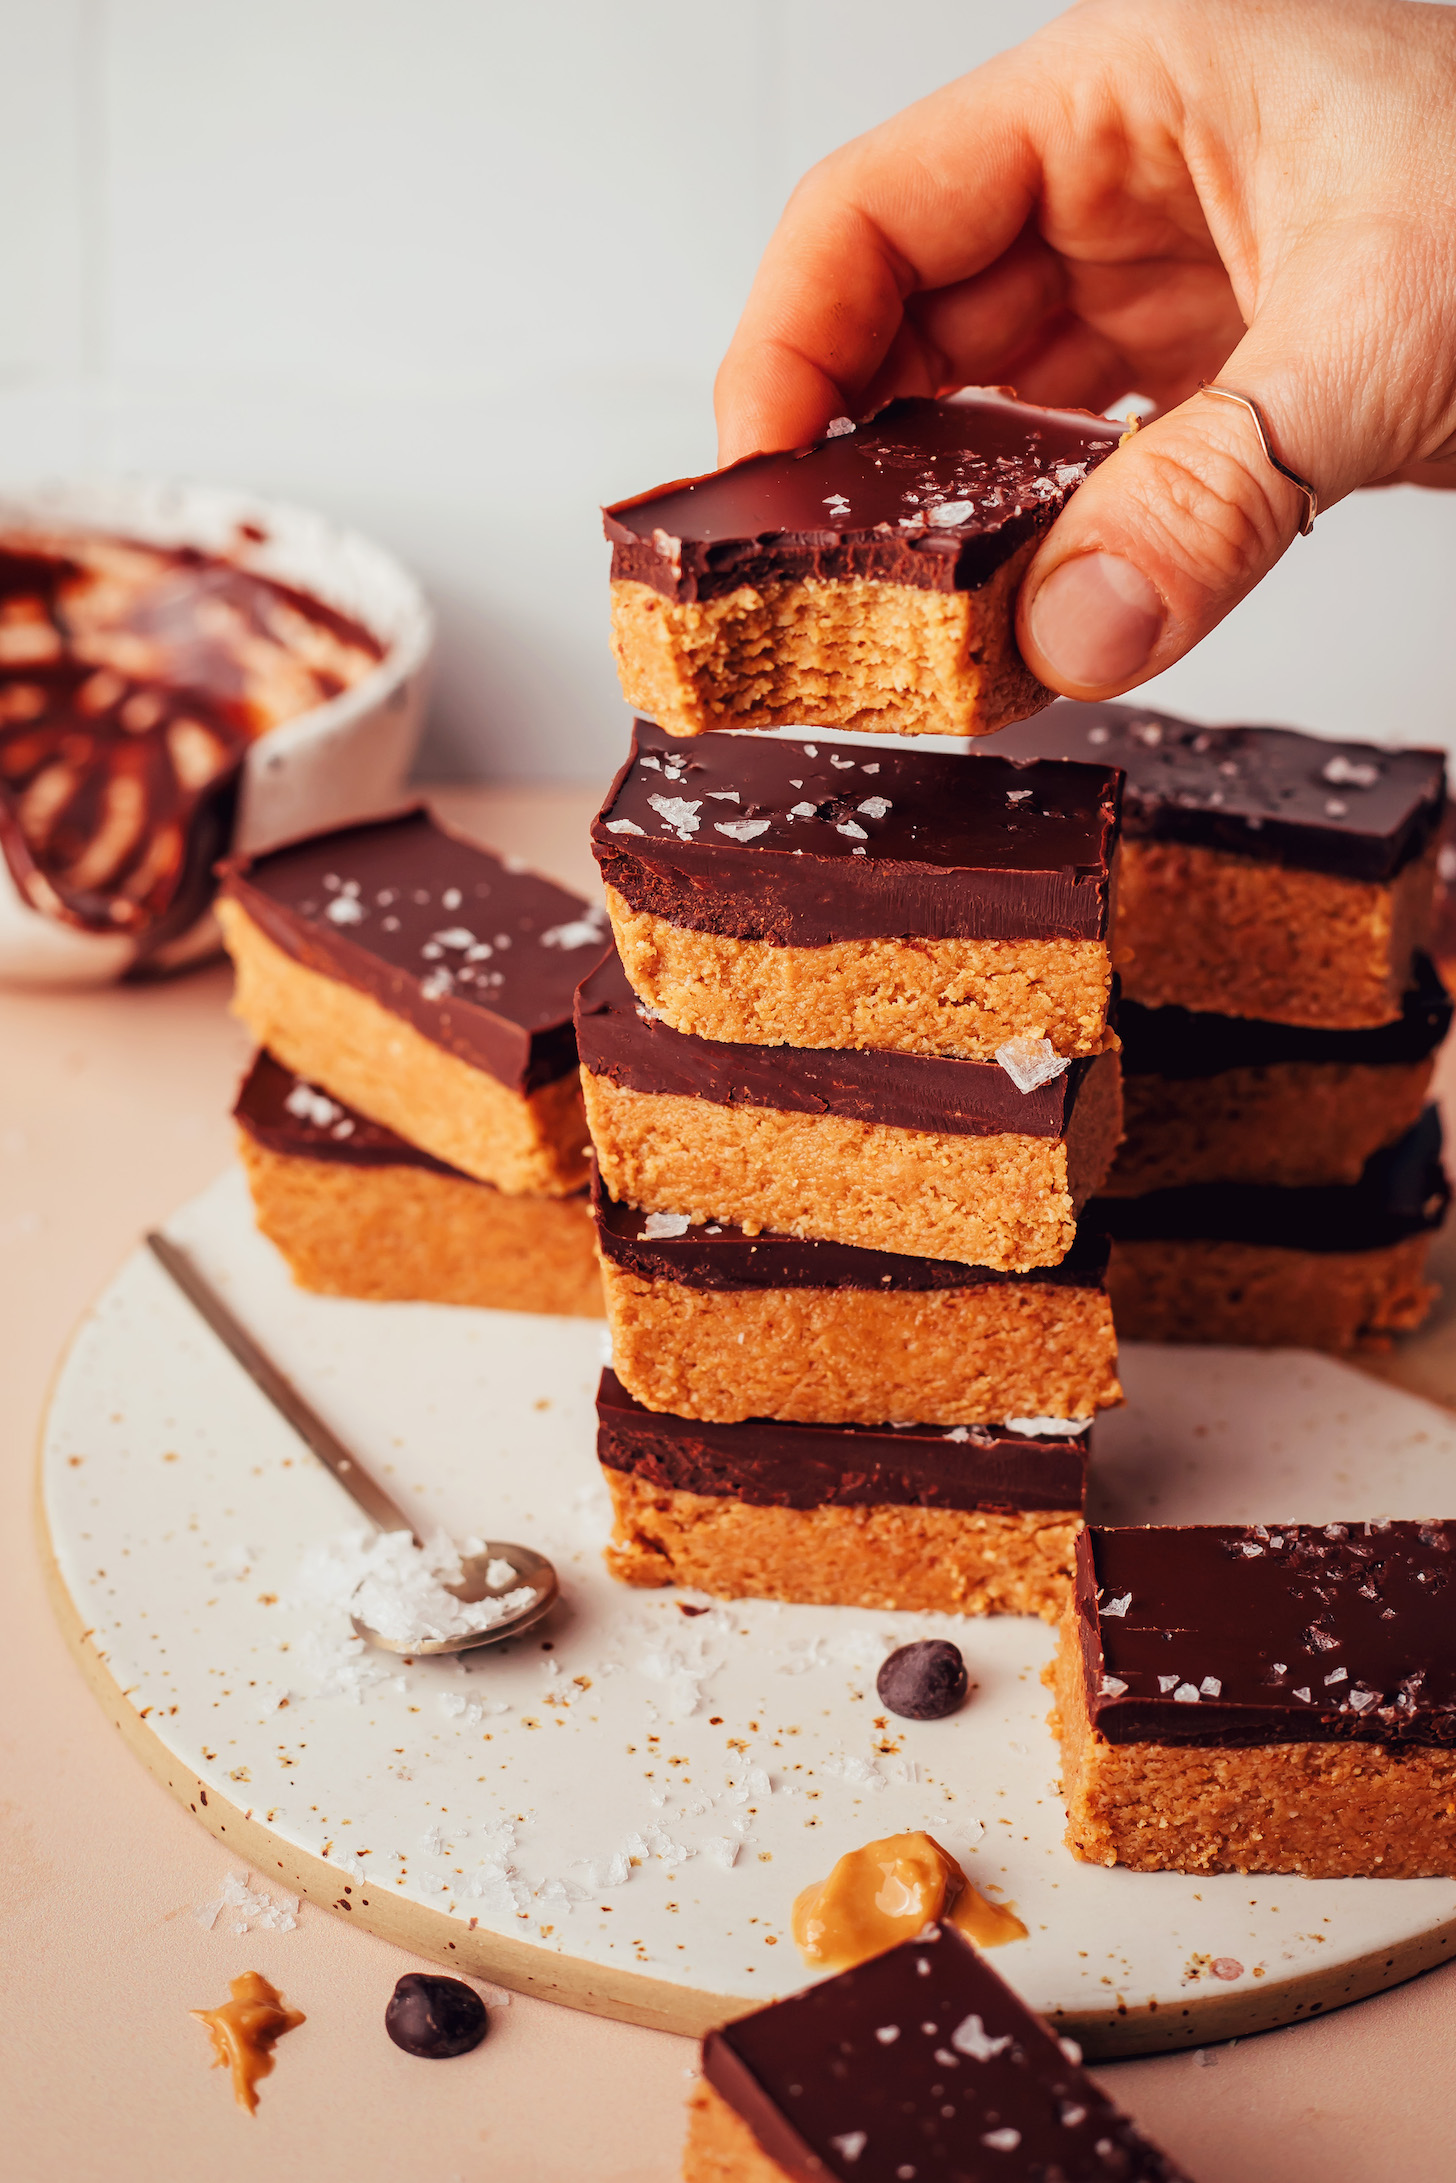 Holding a no-bake peanut butter cup bar above a stack of more bars